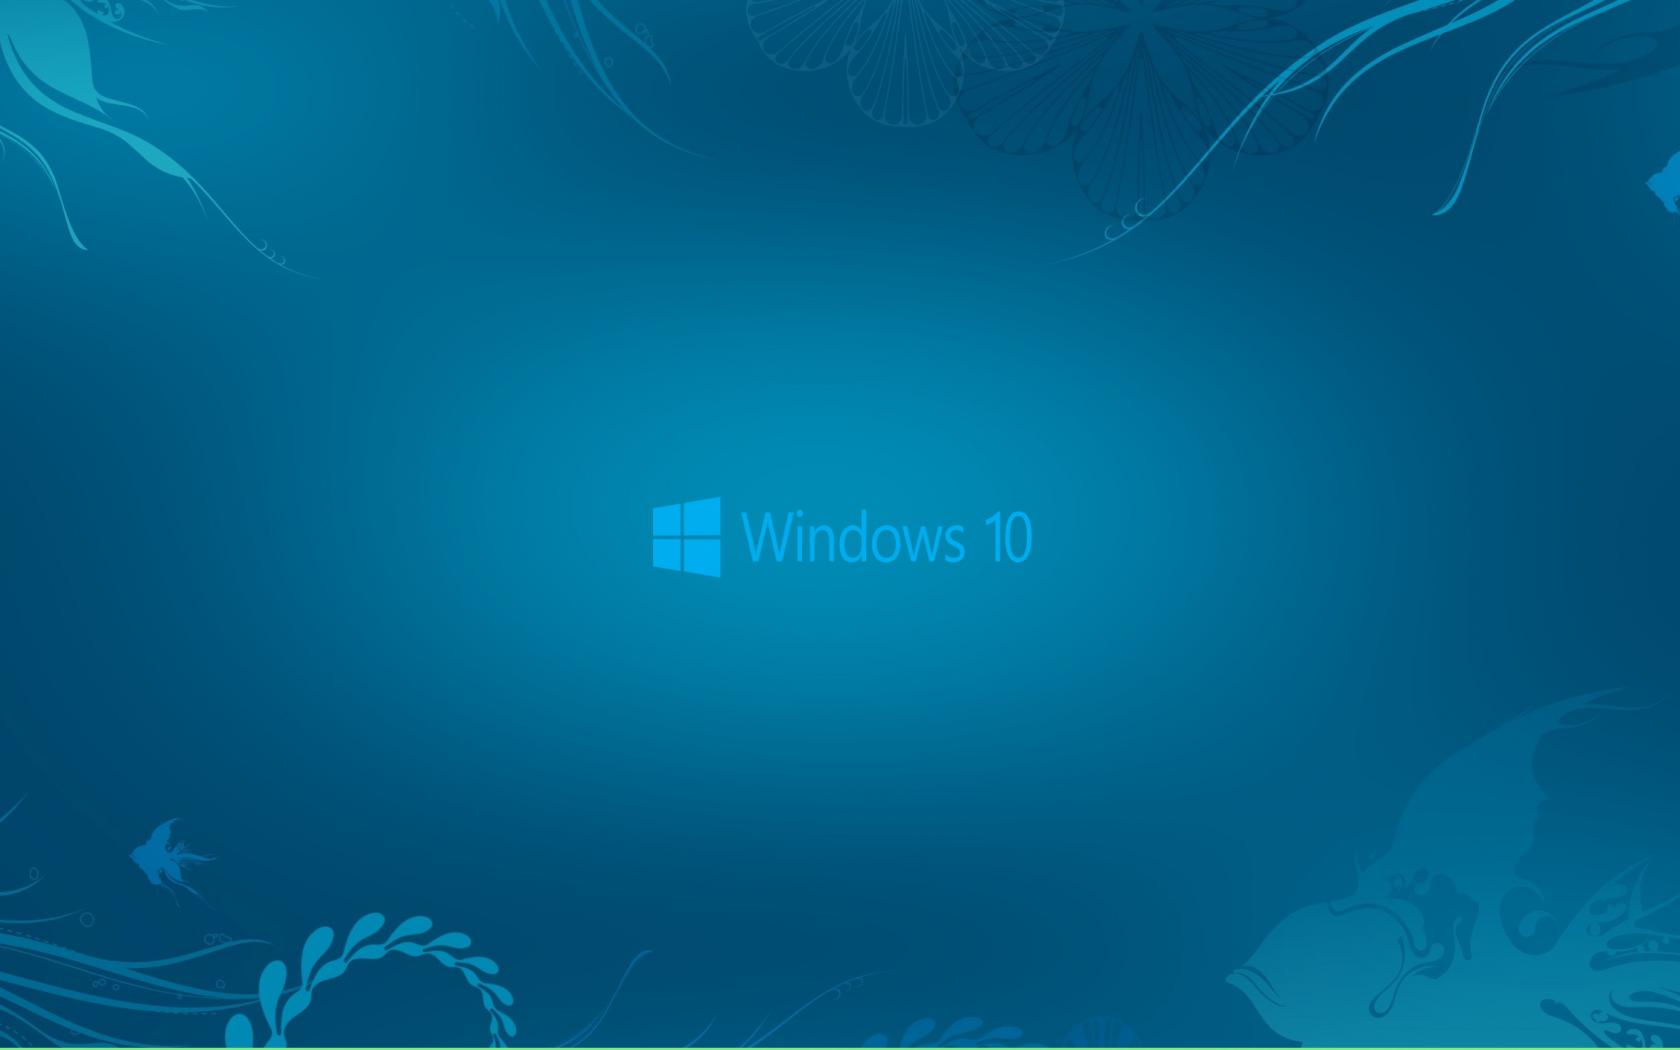 Windows 10 Wallpaper in Abstract Deep Blue See and New Logo HD 1680x1050